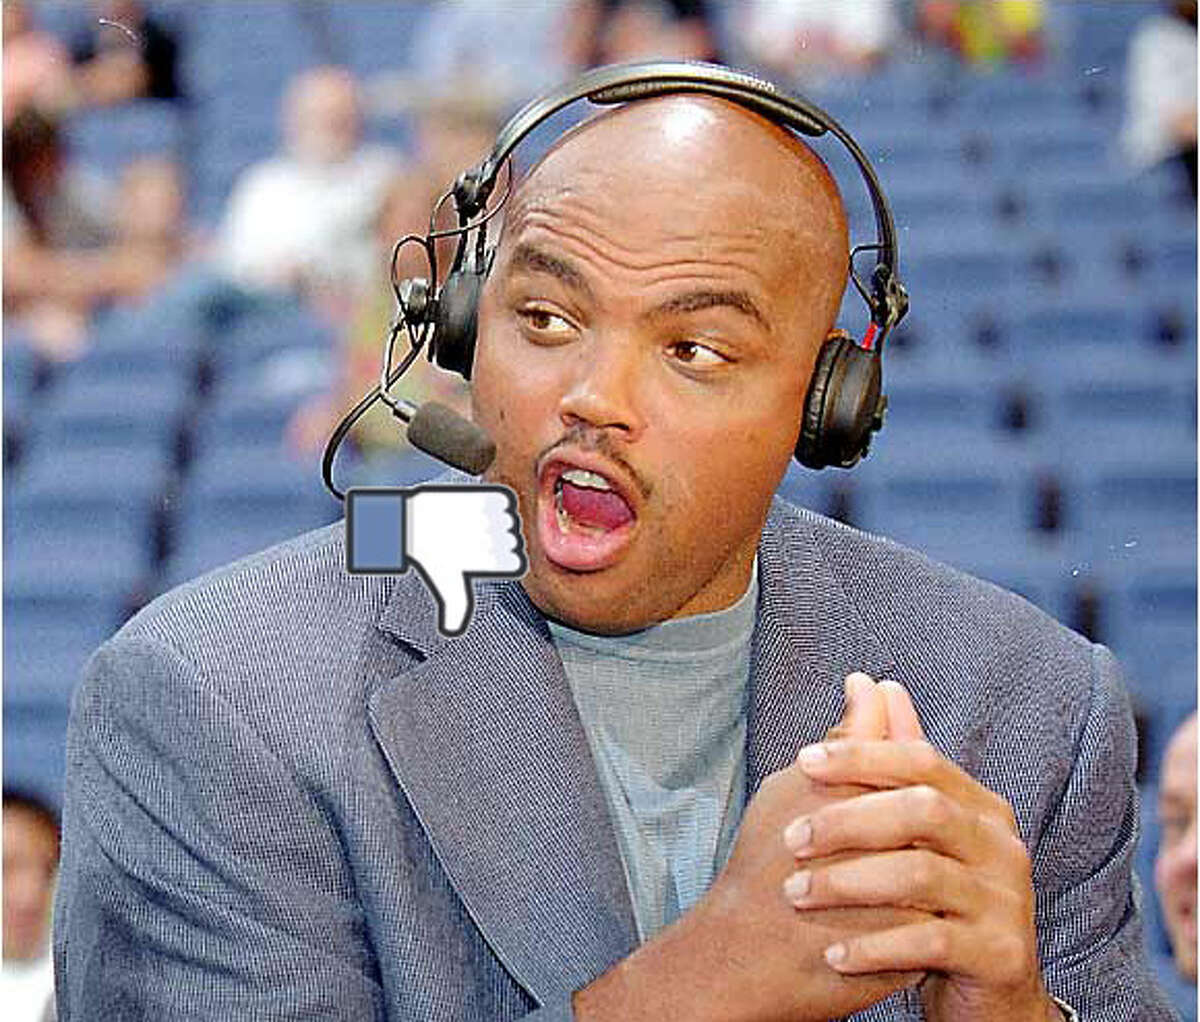 Anything starting with "Charles Barkley has a point."